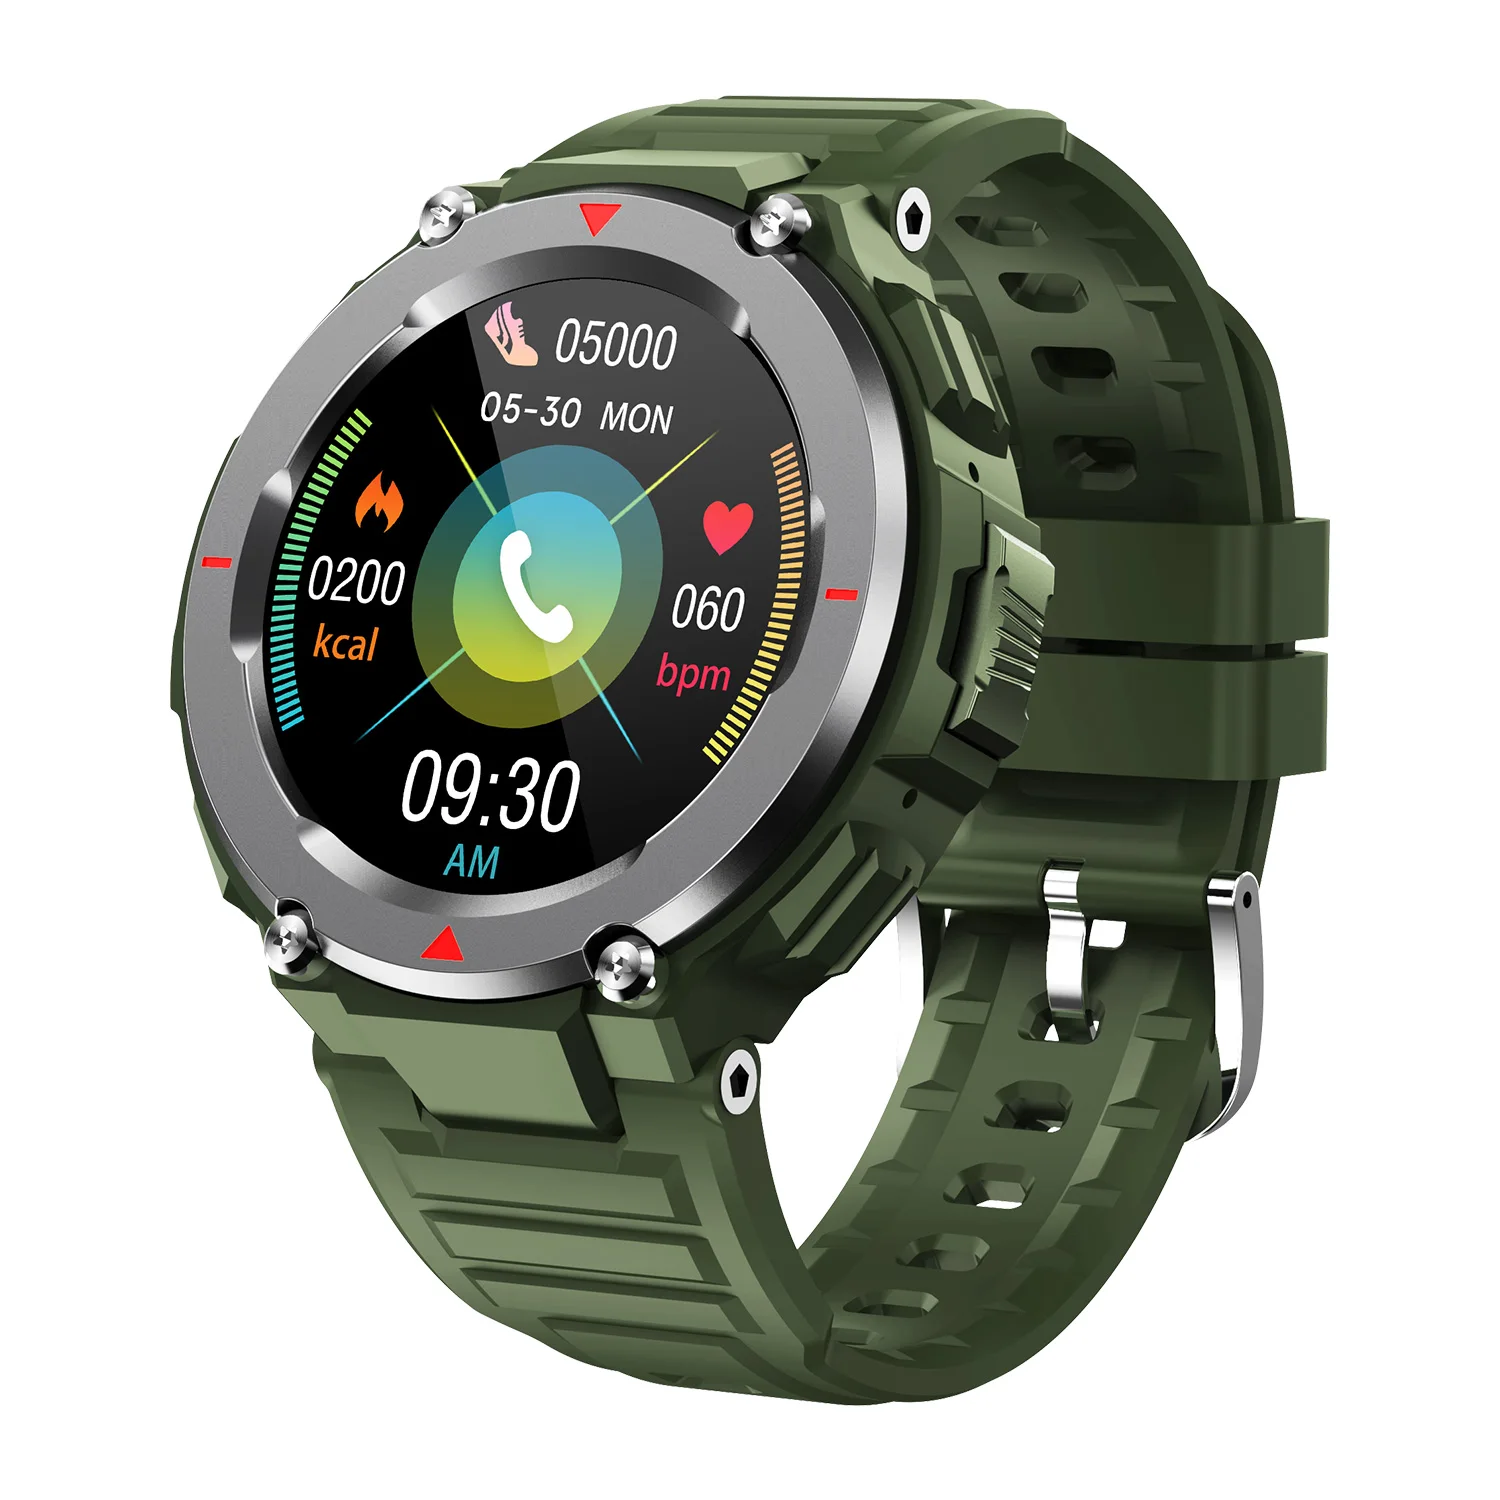 

2021 Hot Sales Relgio Inteligente S25 Sport wirst IP67 Waterproof Full Touch Heart Rate Smart watch For Android IOS Smart Watch, Black,army green